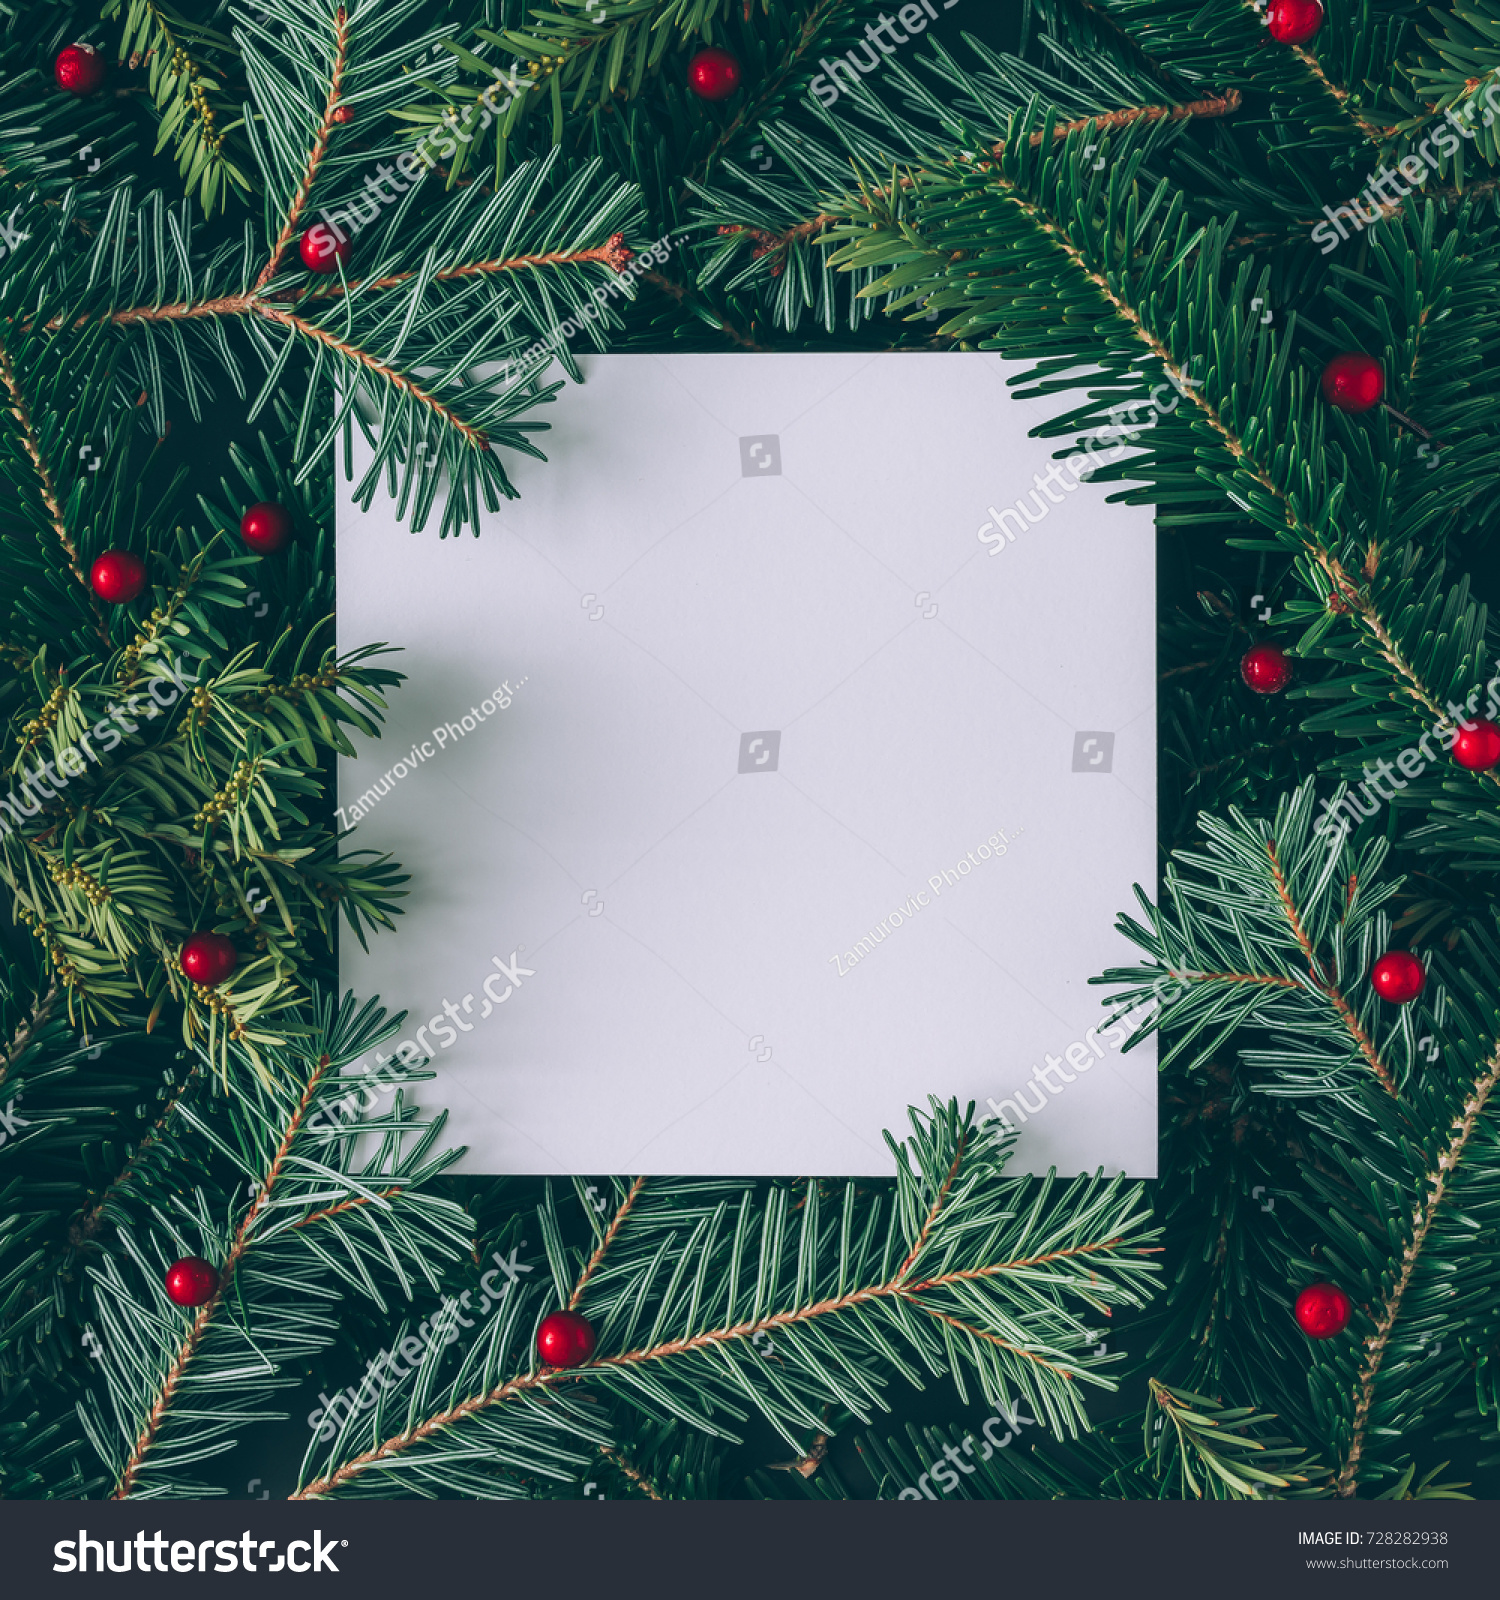 Creative layout made of Christmas tree branches with paper card note. Flat lay. Nature New Year concept. #728282938